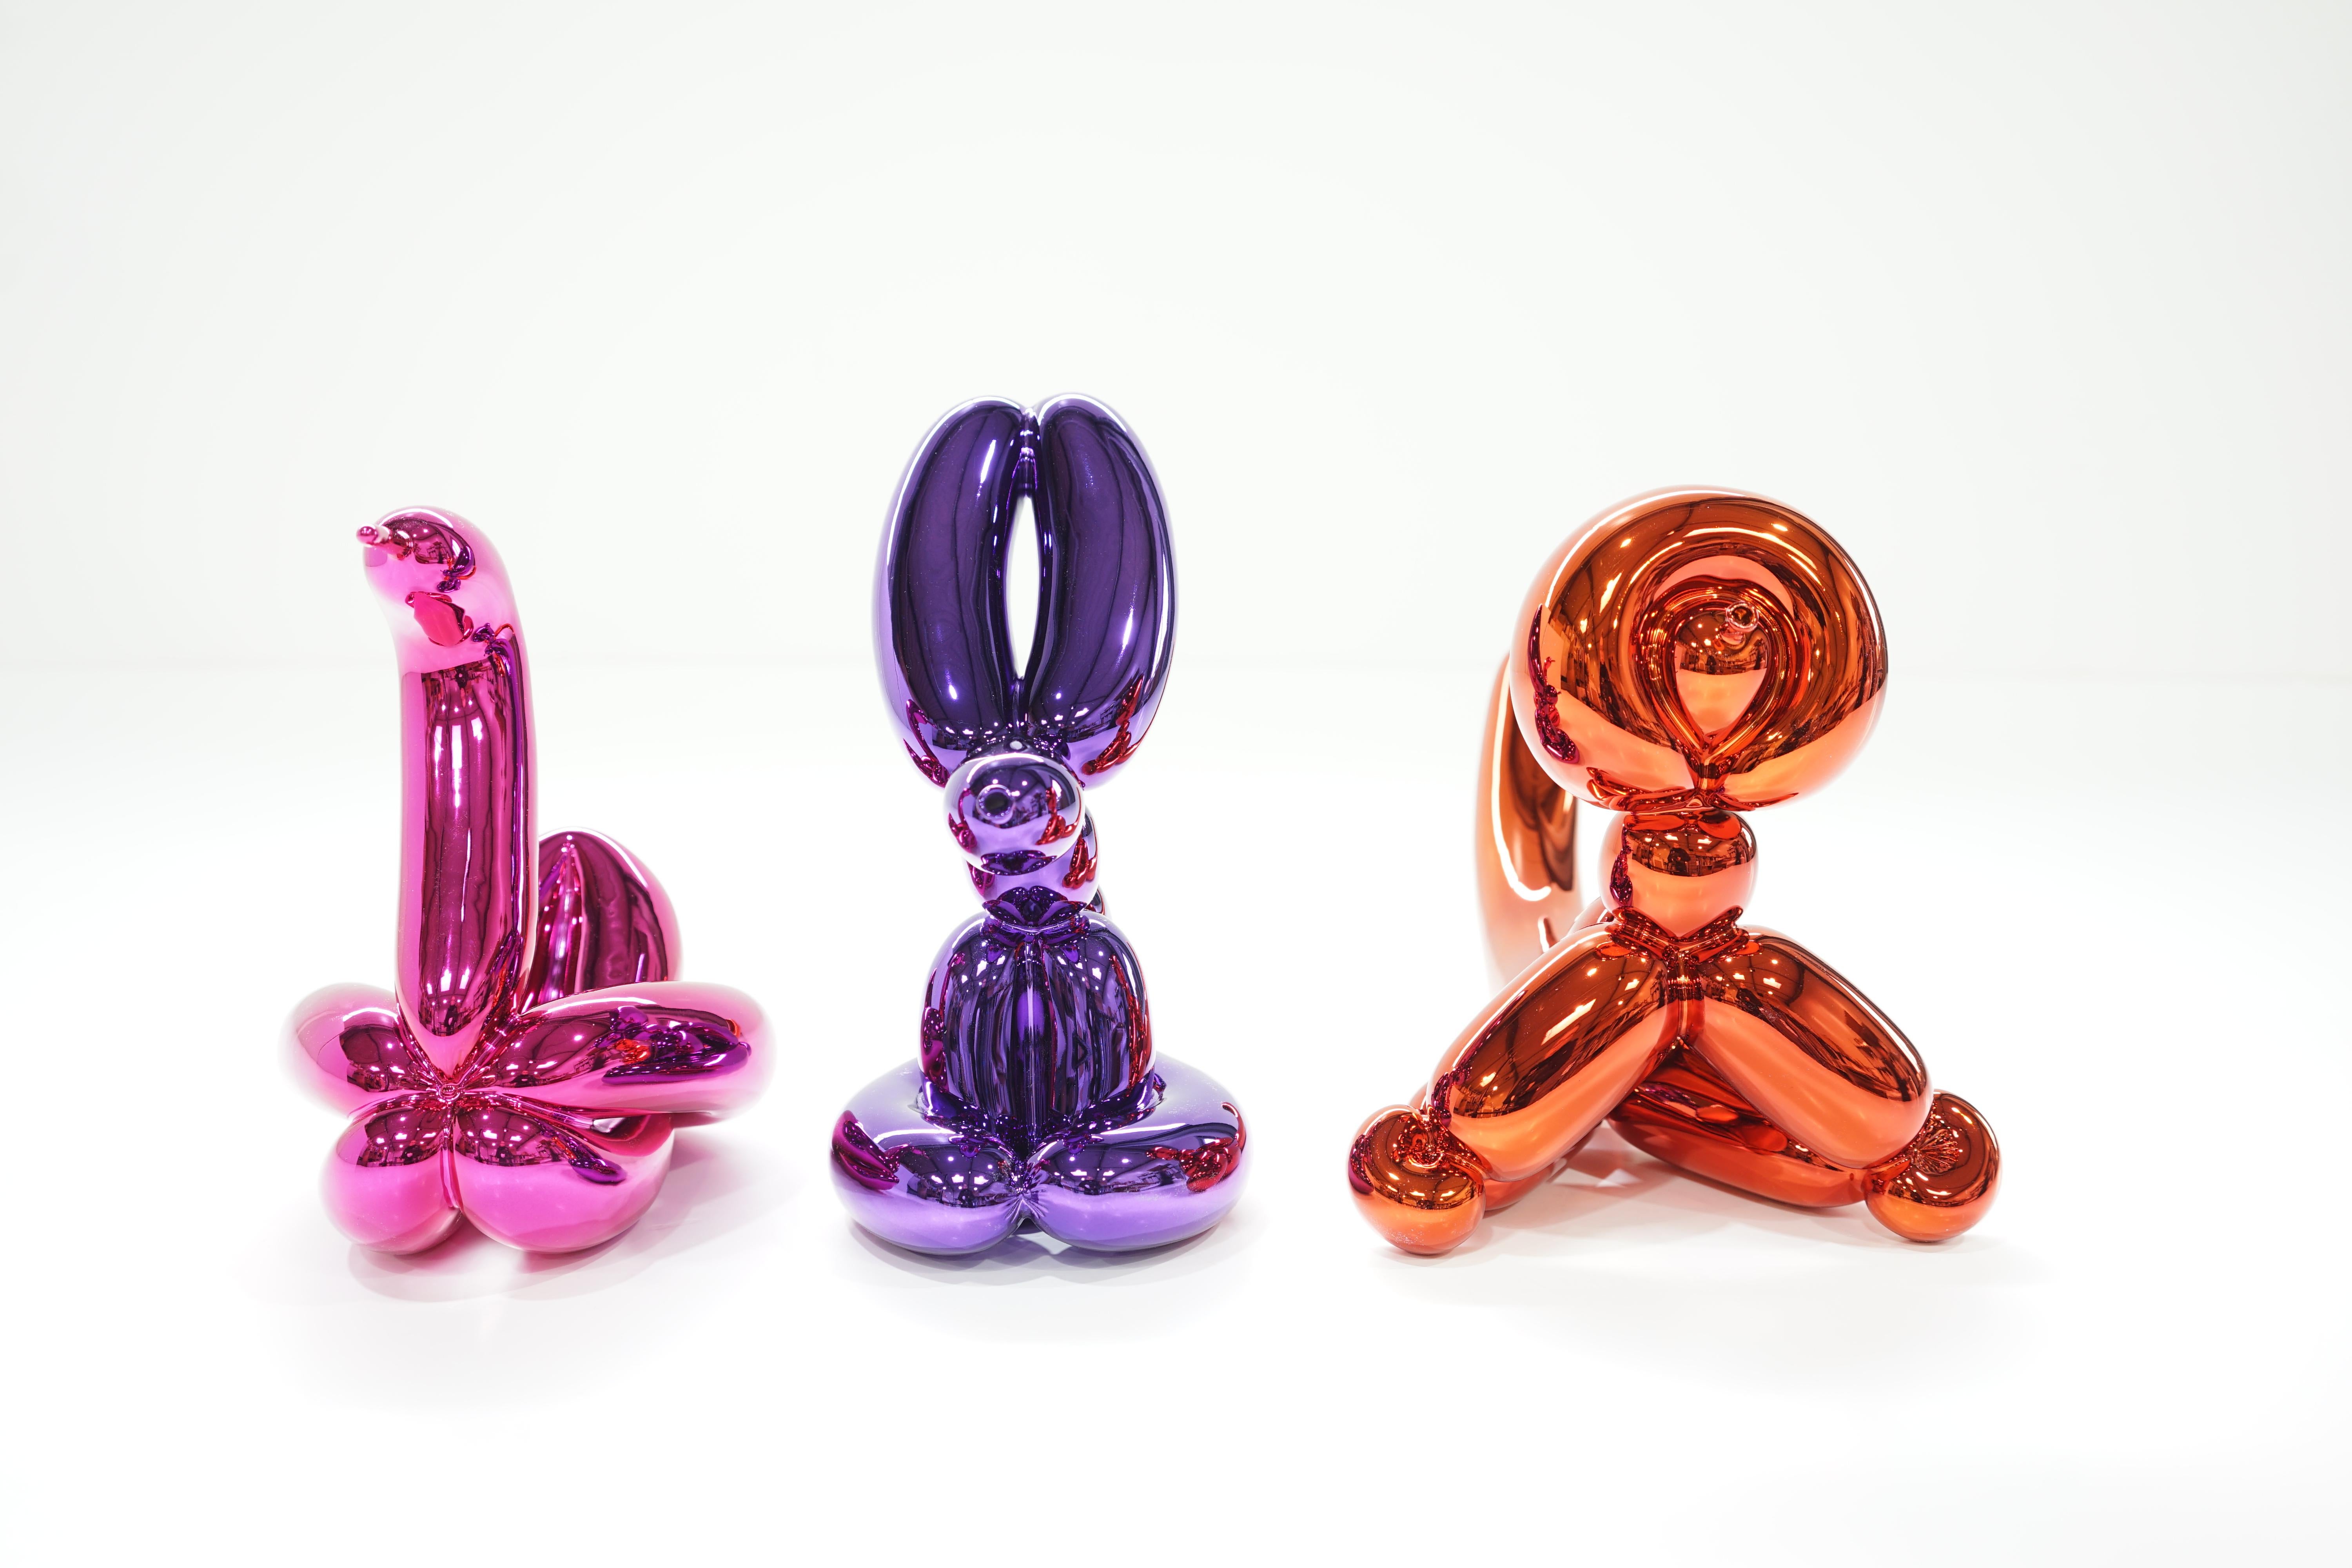 Balloon Animals Set II (matching edition number) - Jeff Koons, 21st Century, Contemporary, Porcelain, Sculpture, Decor, Limited Edition, Art

Limoges porcelain with chromatic metalized coating
Rabbit (Violet): 29,2 x 13,9 x 21 cm (11.5 x 5.4 x 8.2